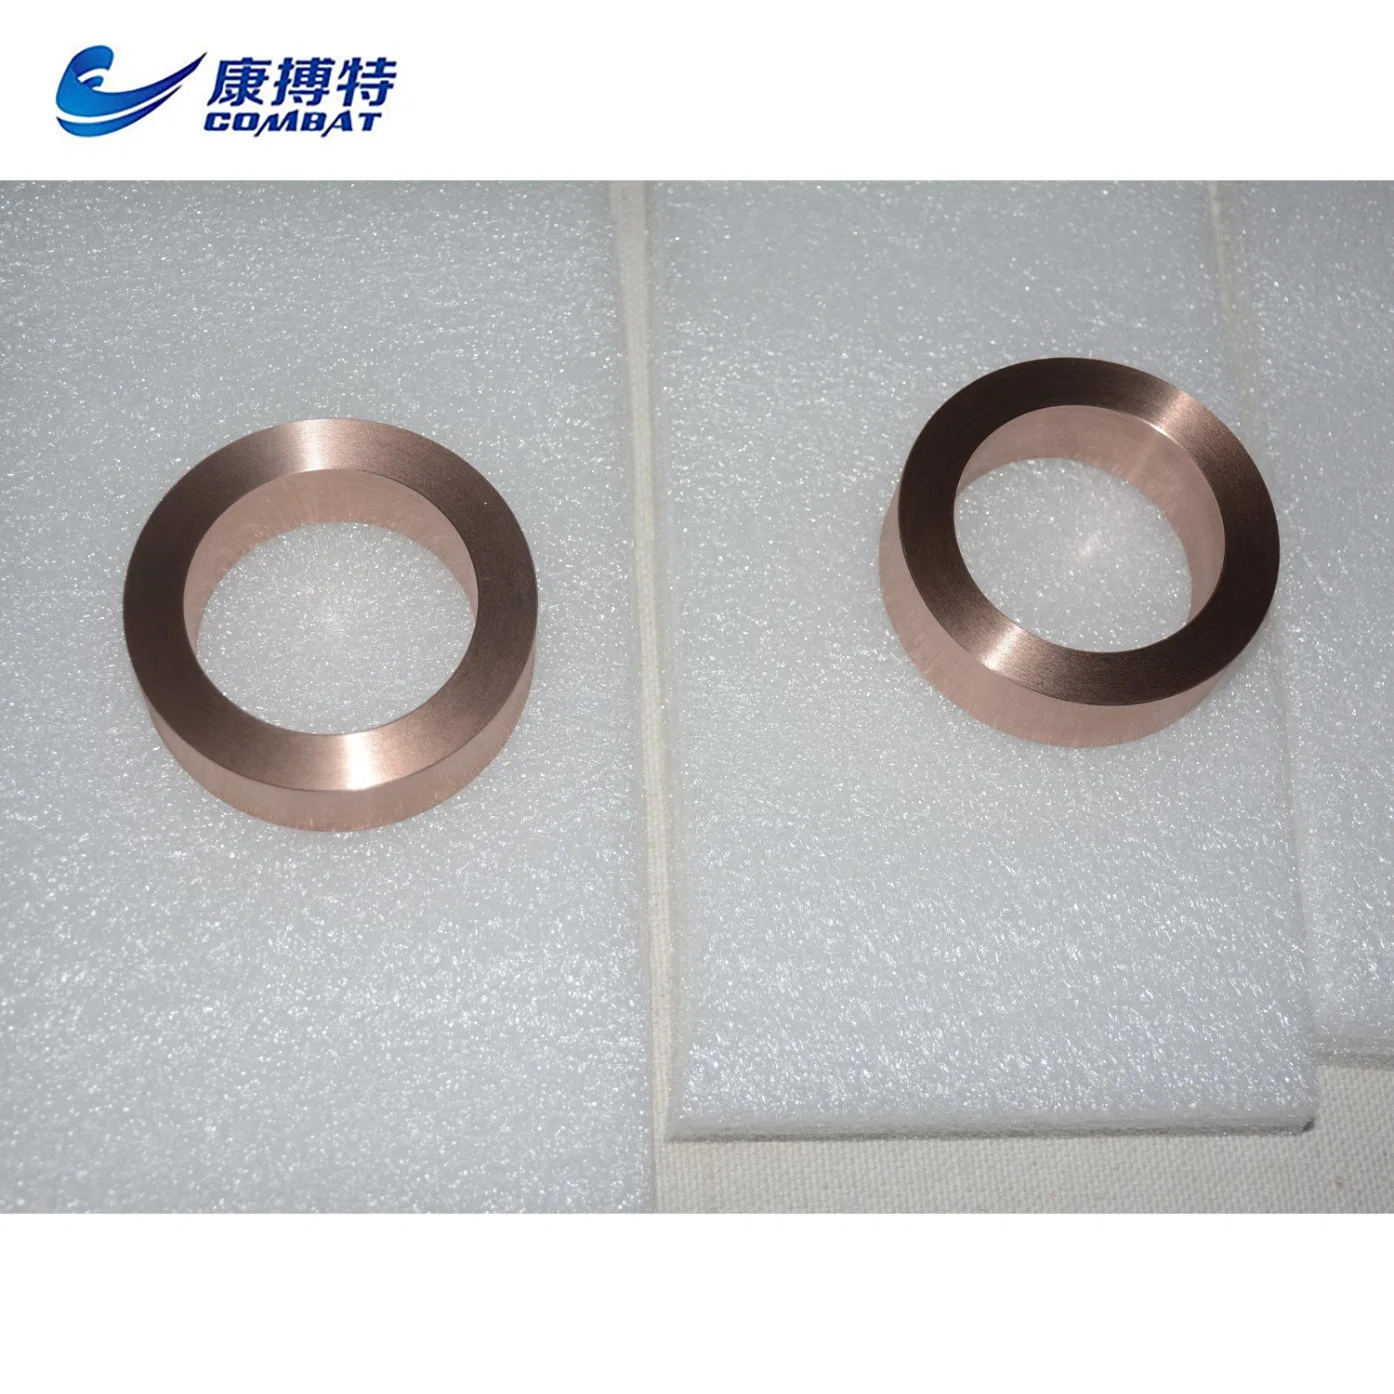 Industrial ASTM Wooden Package Luoyang Combat Cl Xi Wcu Tungsten Copper Hot Sale